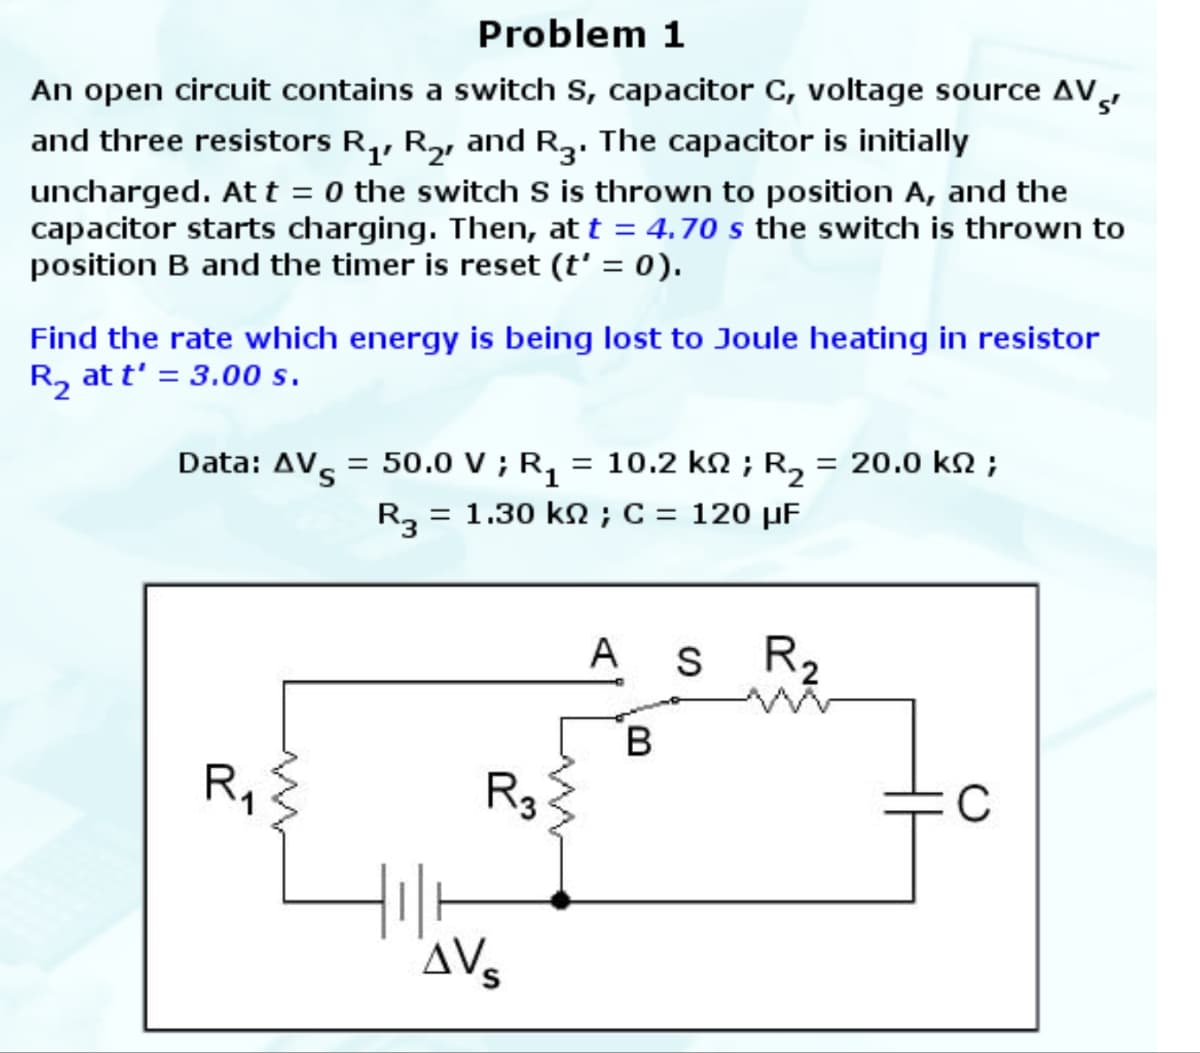 Problem 1
An open circuit contains a switch S, capacitor C, voltage source AV
and three resistors R1, R2, and R3. The capacitor is initially
uncharged. At t = 0 the switch S is thrown to position A, and the
capacitor starts charging. Then, at t = 4.70 s the switch is thrown to
position B and the timer is reset (t' = 0).
Find the rate which energy is being lost to Joule heating in resistor
R₂ at t' = 3.00 s.
Data: AV = 50.0 V; R₁ = 10.2 km; R₂ = 20.0 kn;
R₁
w
R3 = 1.30 kn; C = 120 μF
R3
AVS
ли
A
B
S
R₂
C